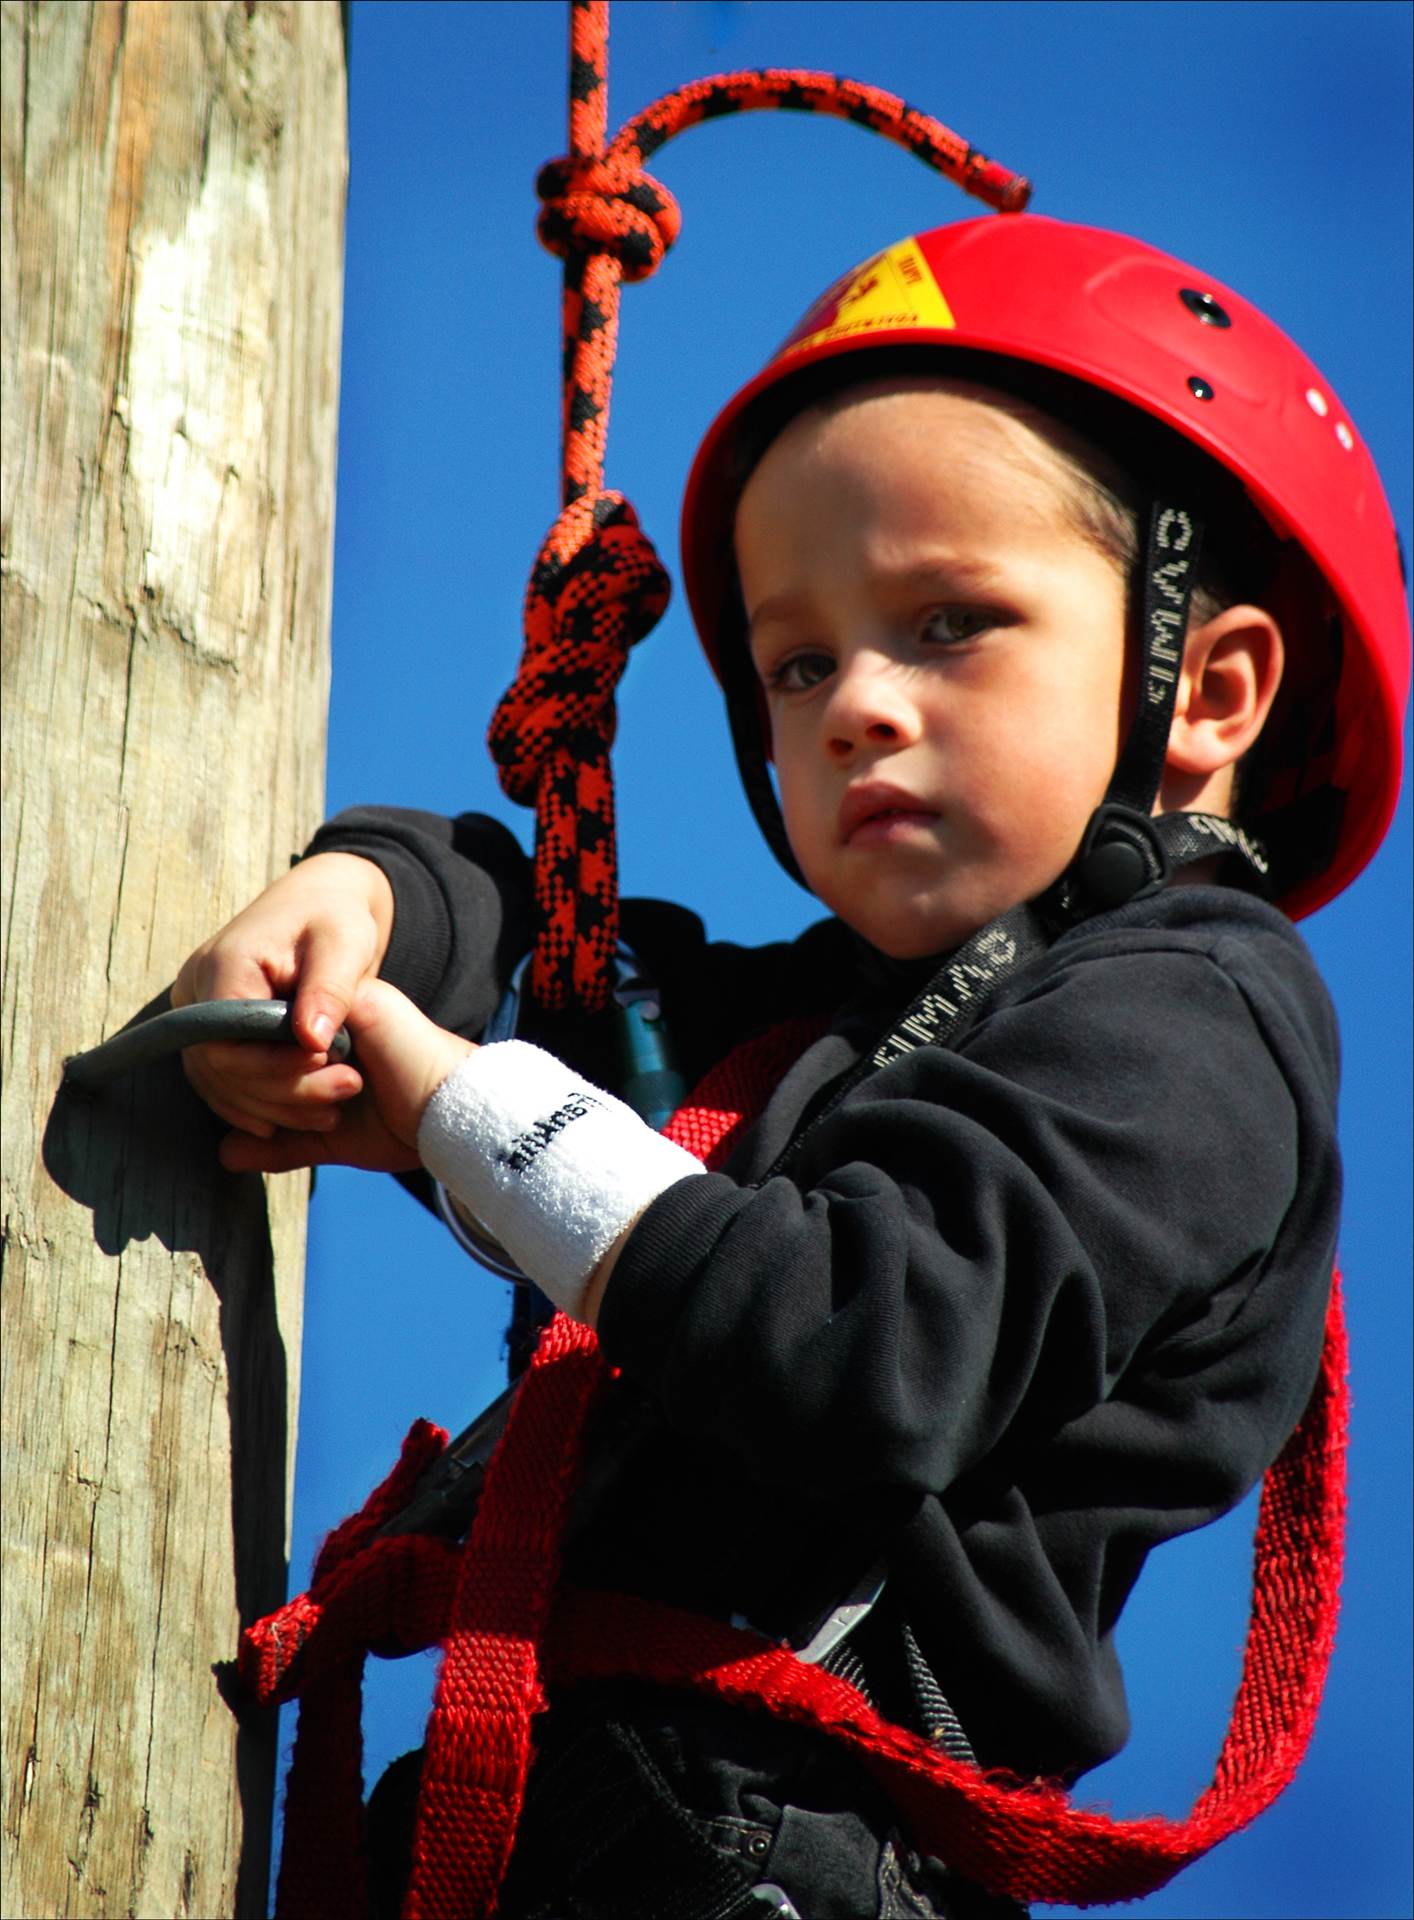 20040404-1-Climbing a ropes course-2.jpg  by WPC-76